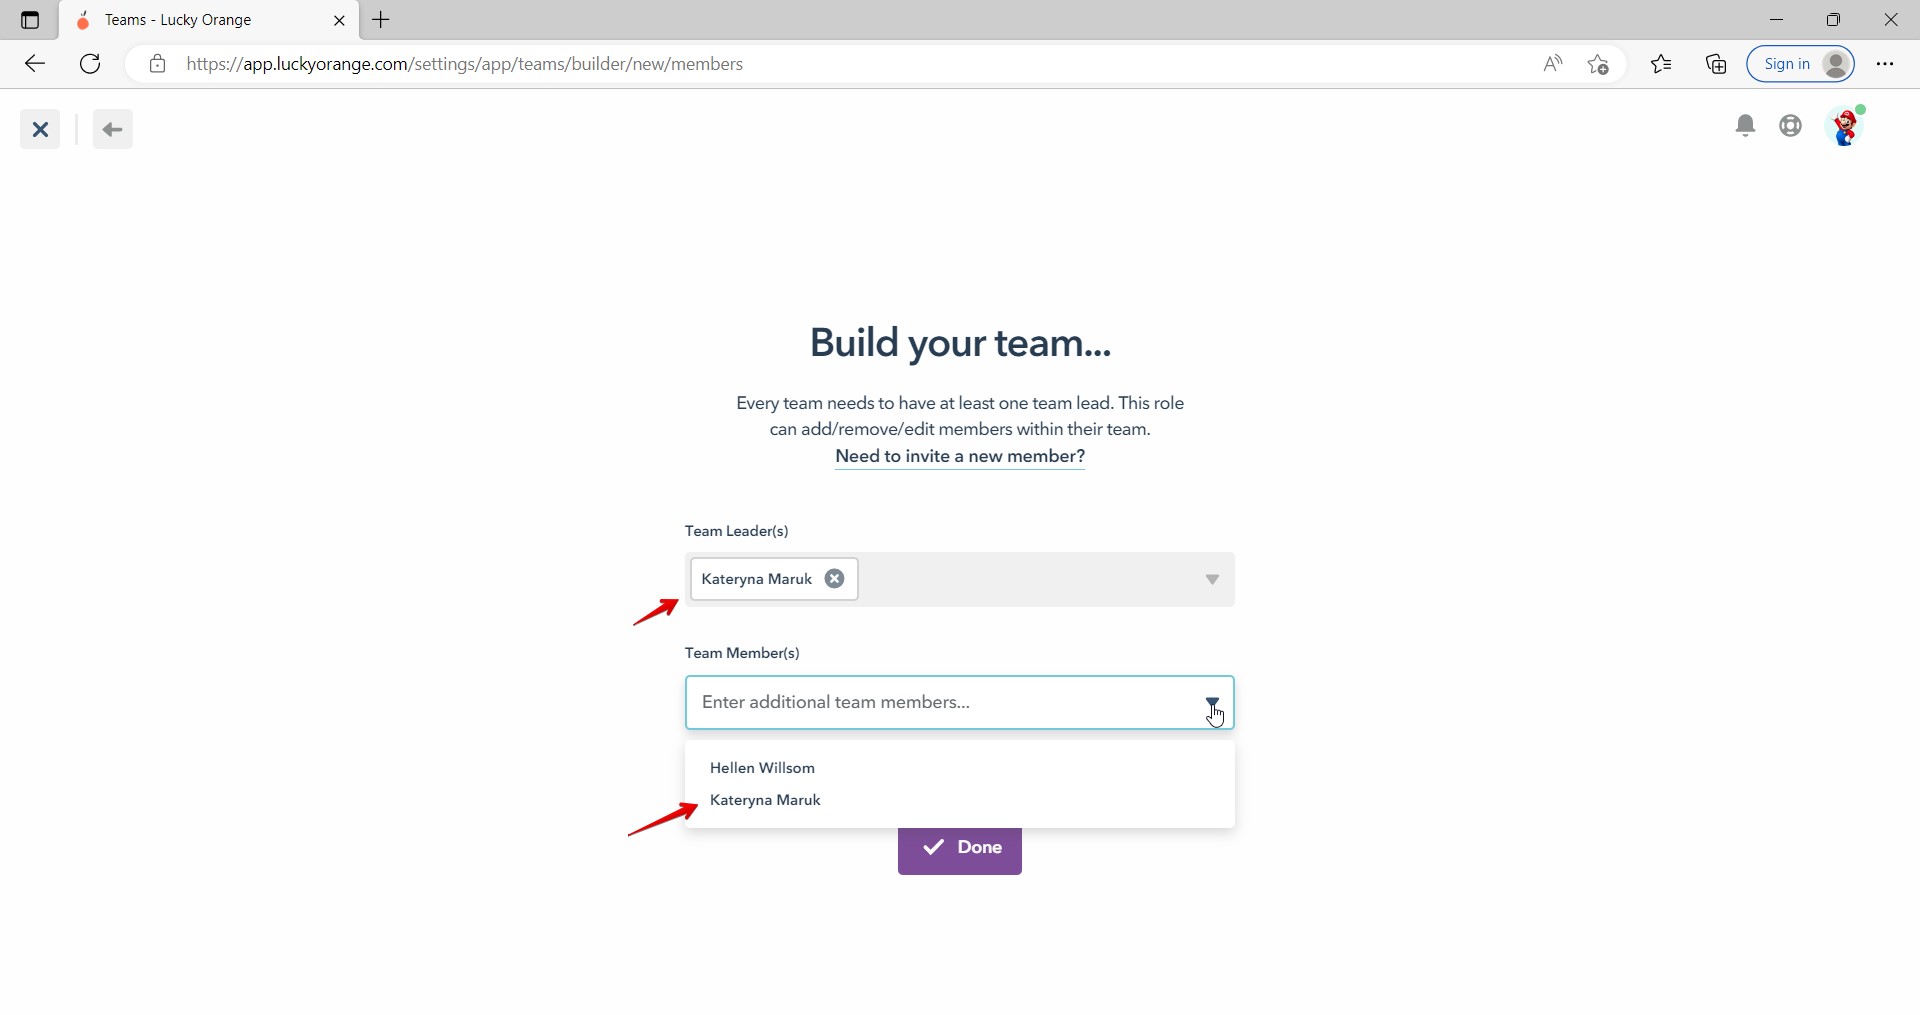 Team leaders are also available as team members during team creation